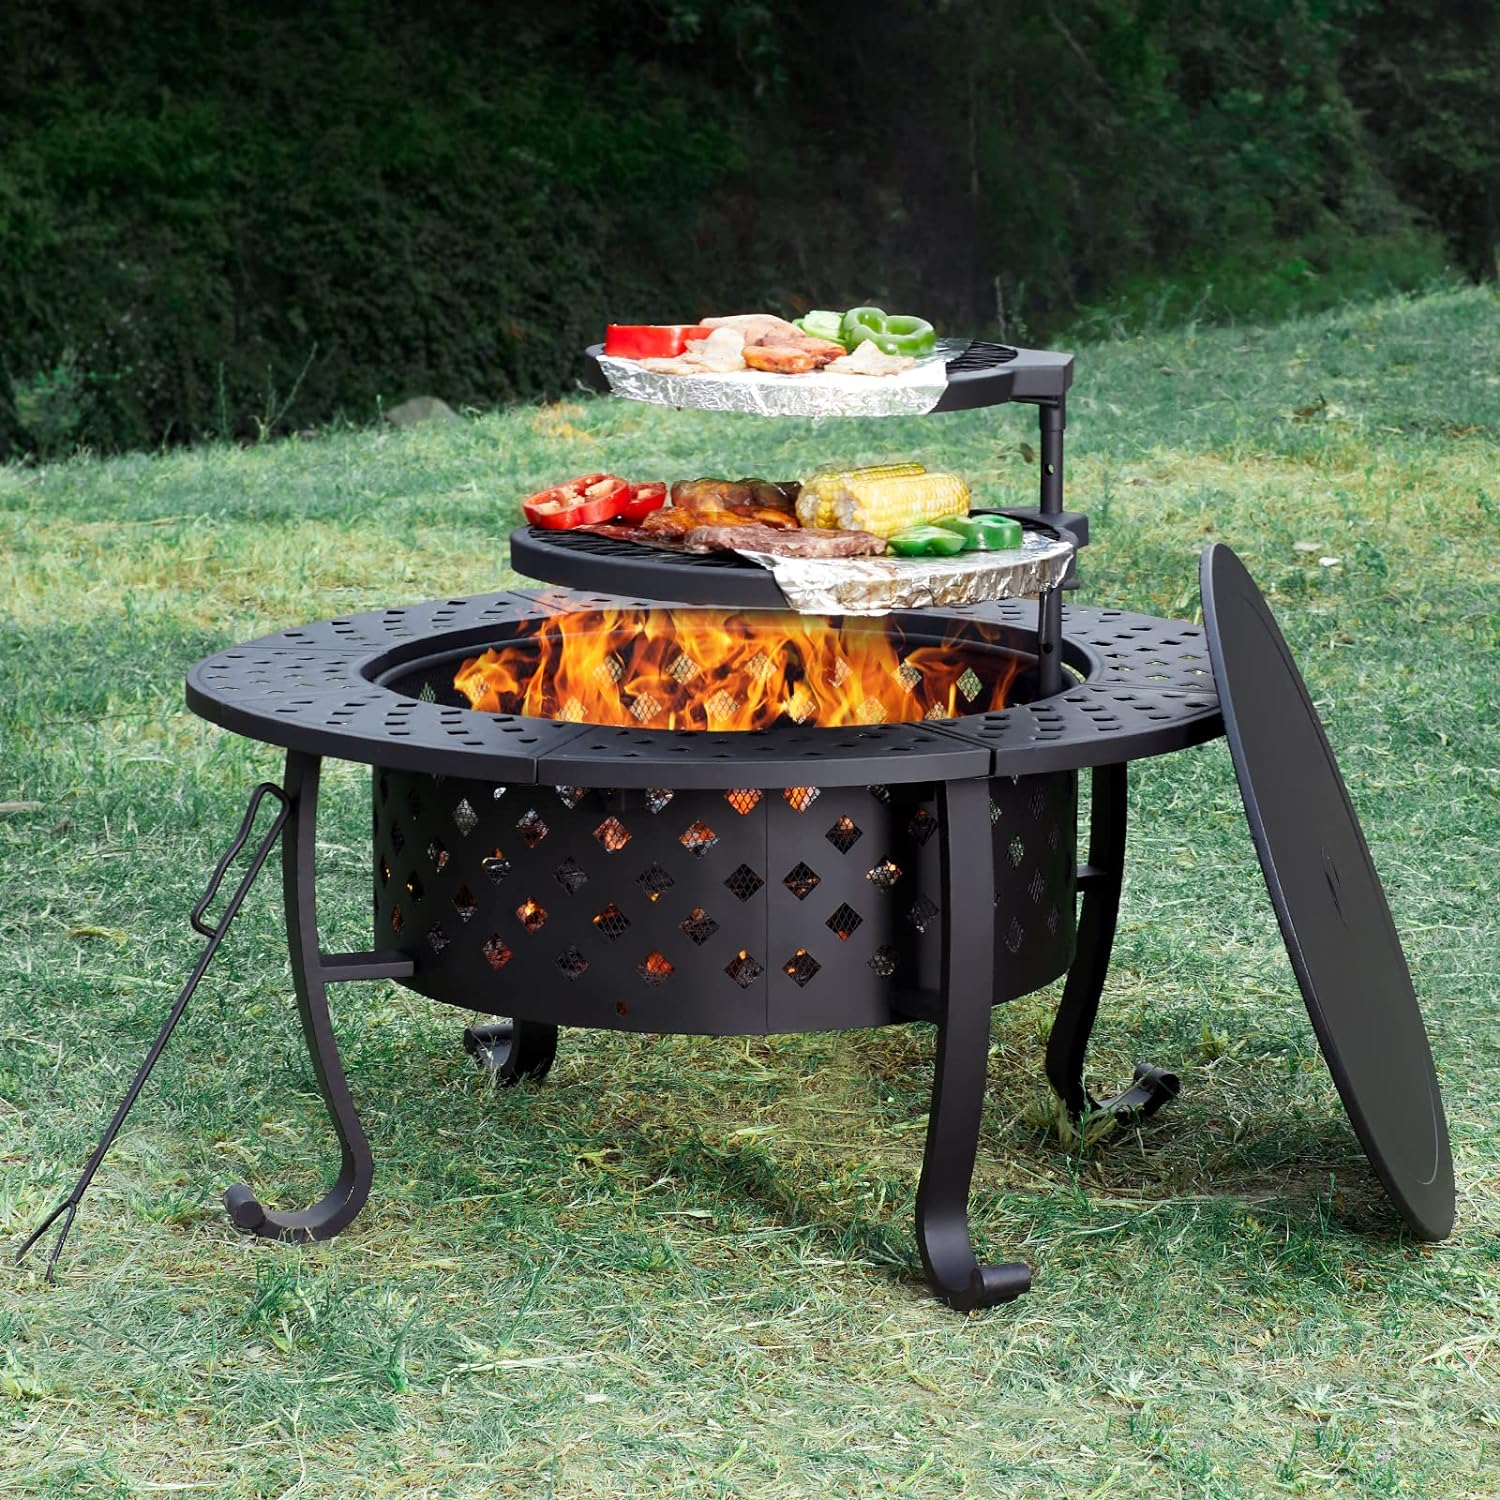 36 Inch Fire Pit with 2 Grill, Outdoor Wood Burning Firepit with Lid, Metal Round Table for Backyard Patio Garden Picnic Camping Bonfire